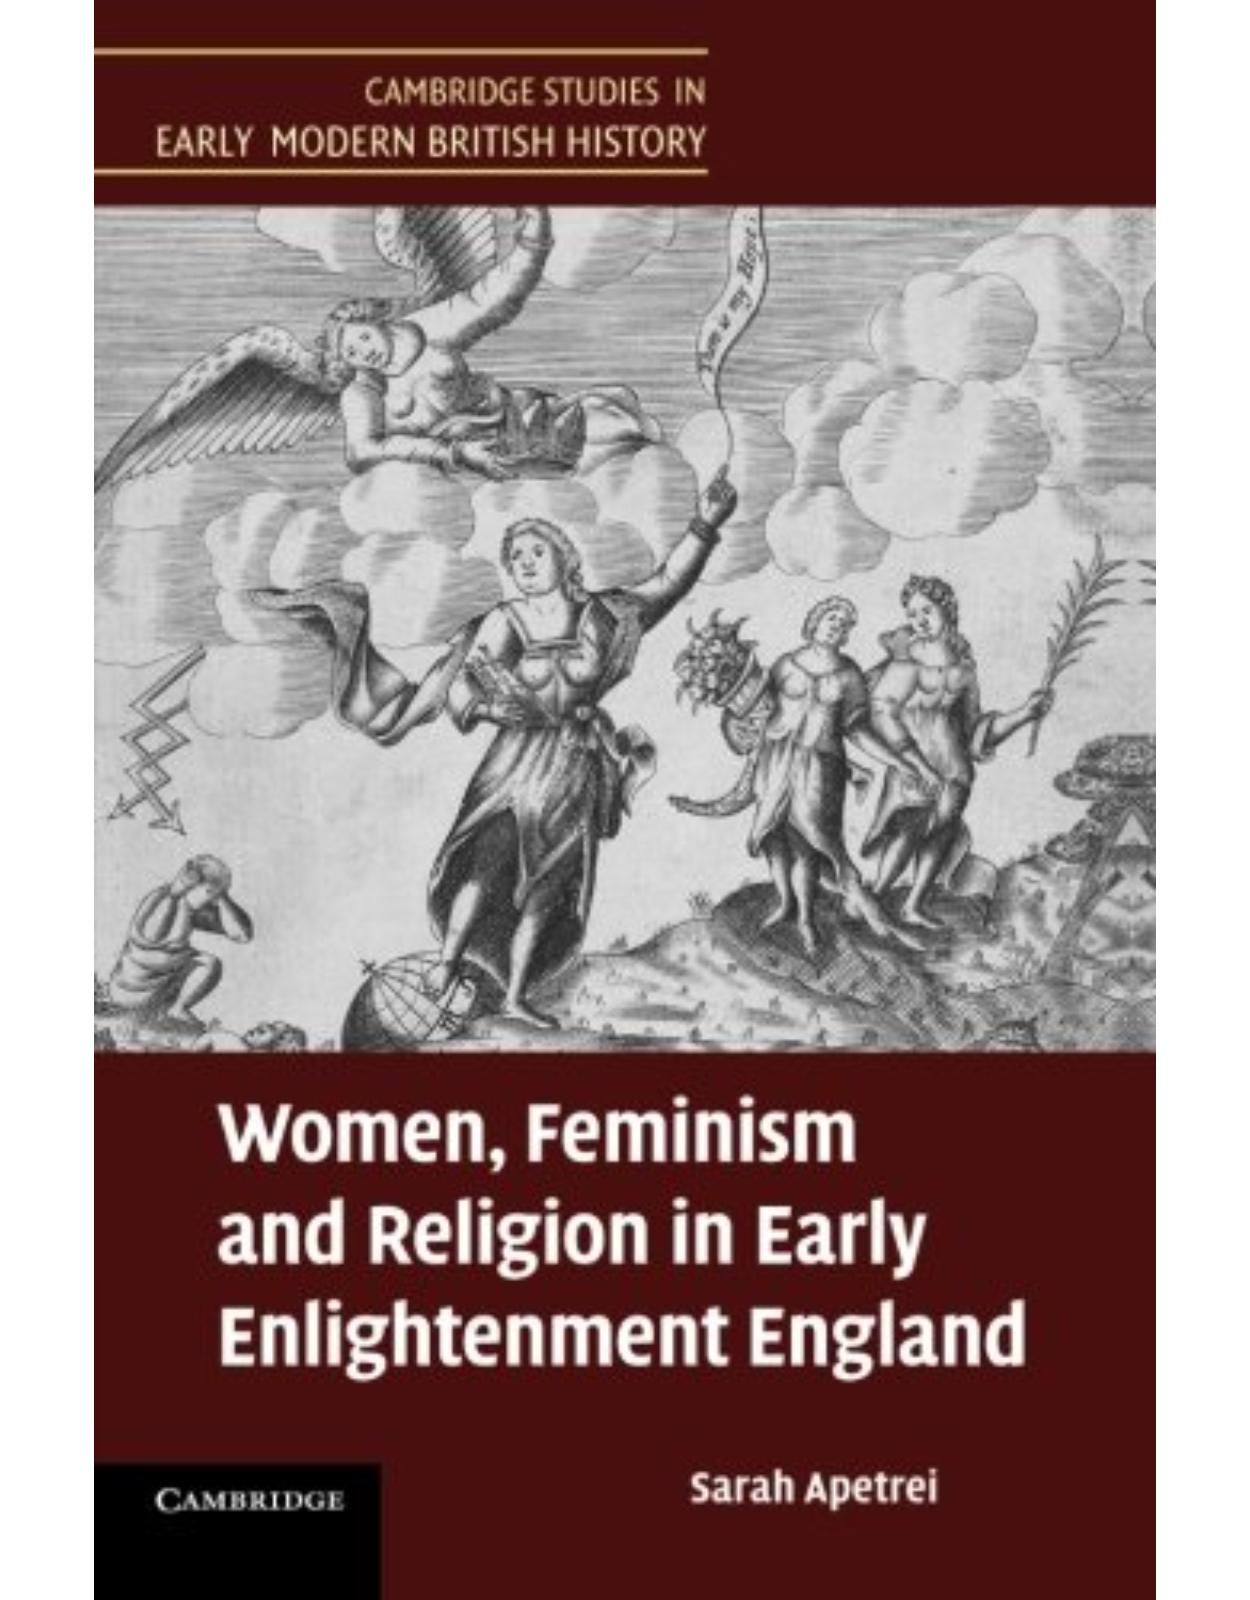 Women, Feminism and Religion in Early Enlightenment England (Cambridge Studies in Early Modern British History)